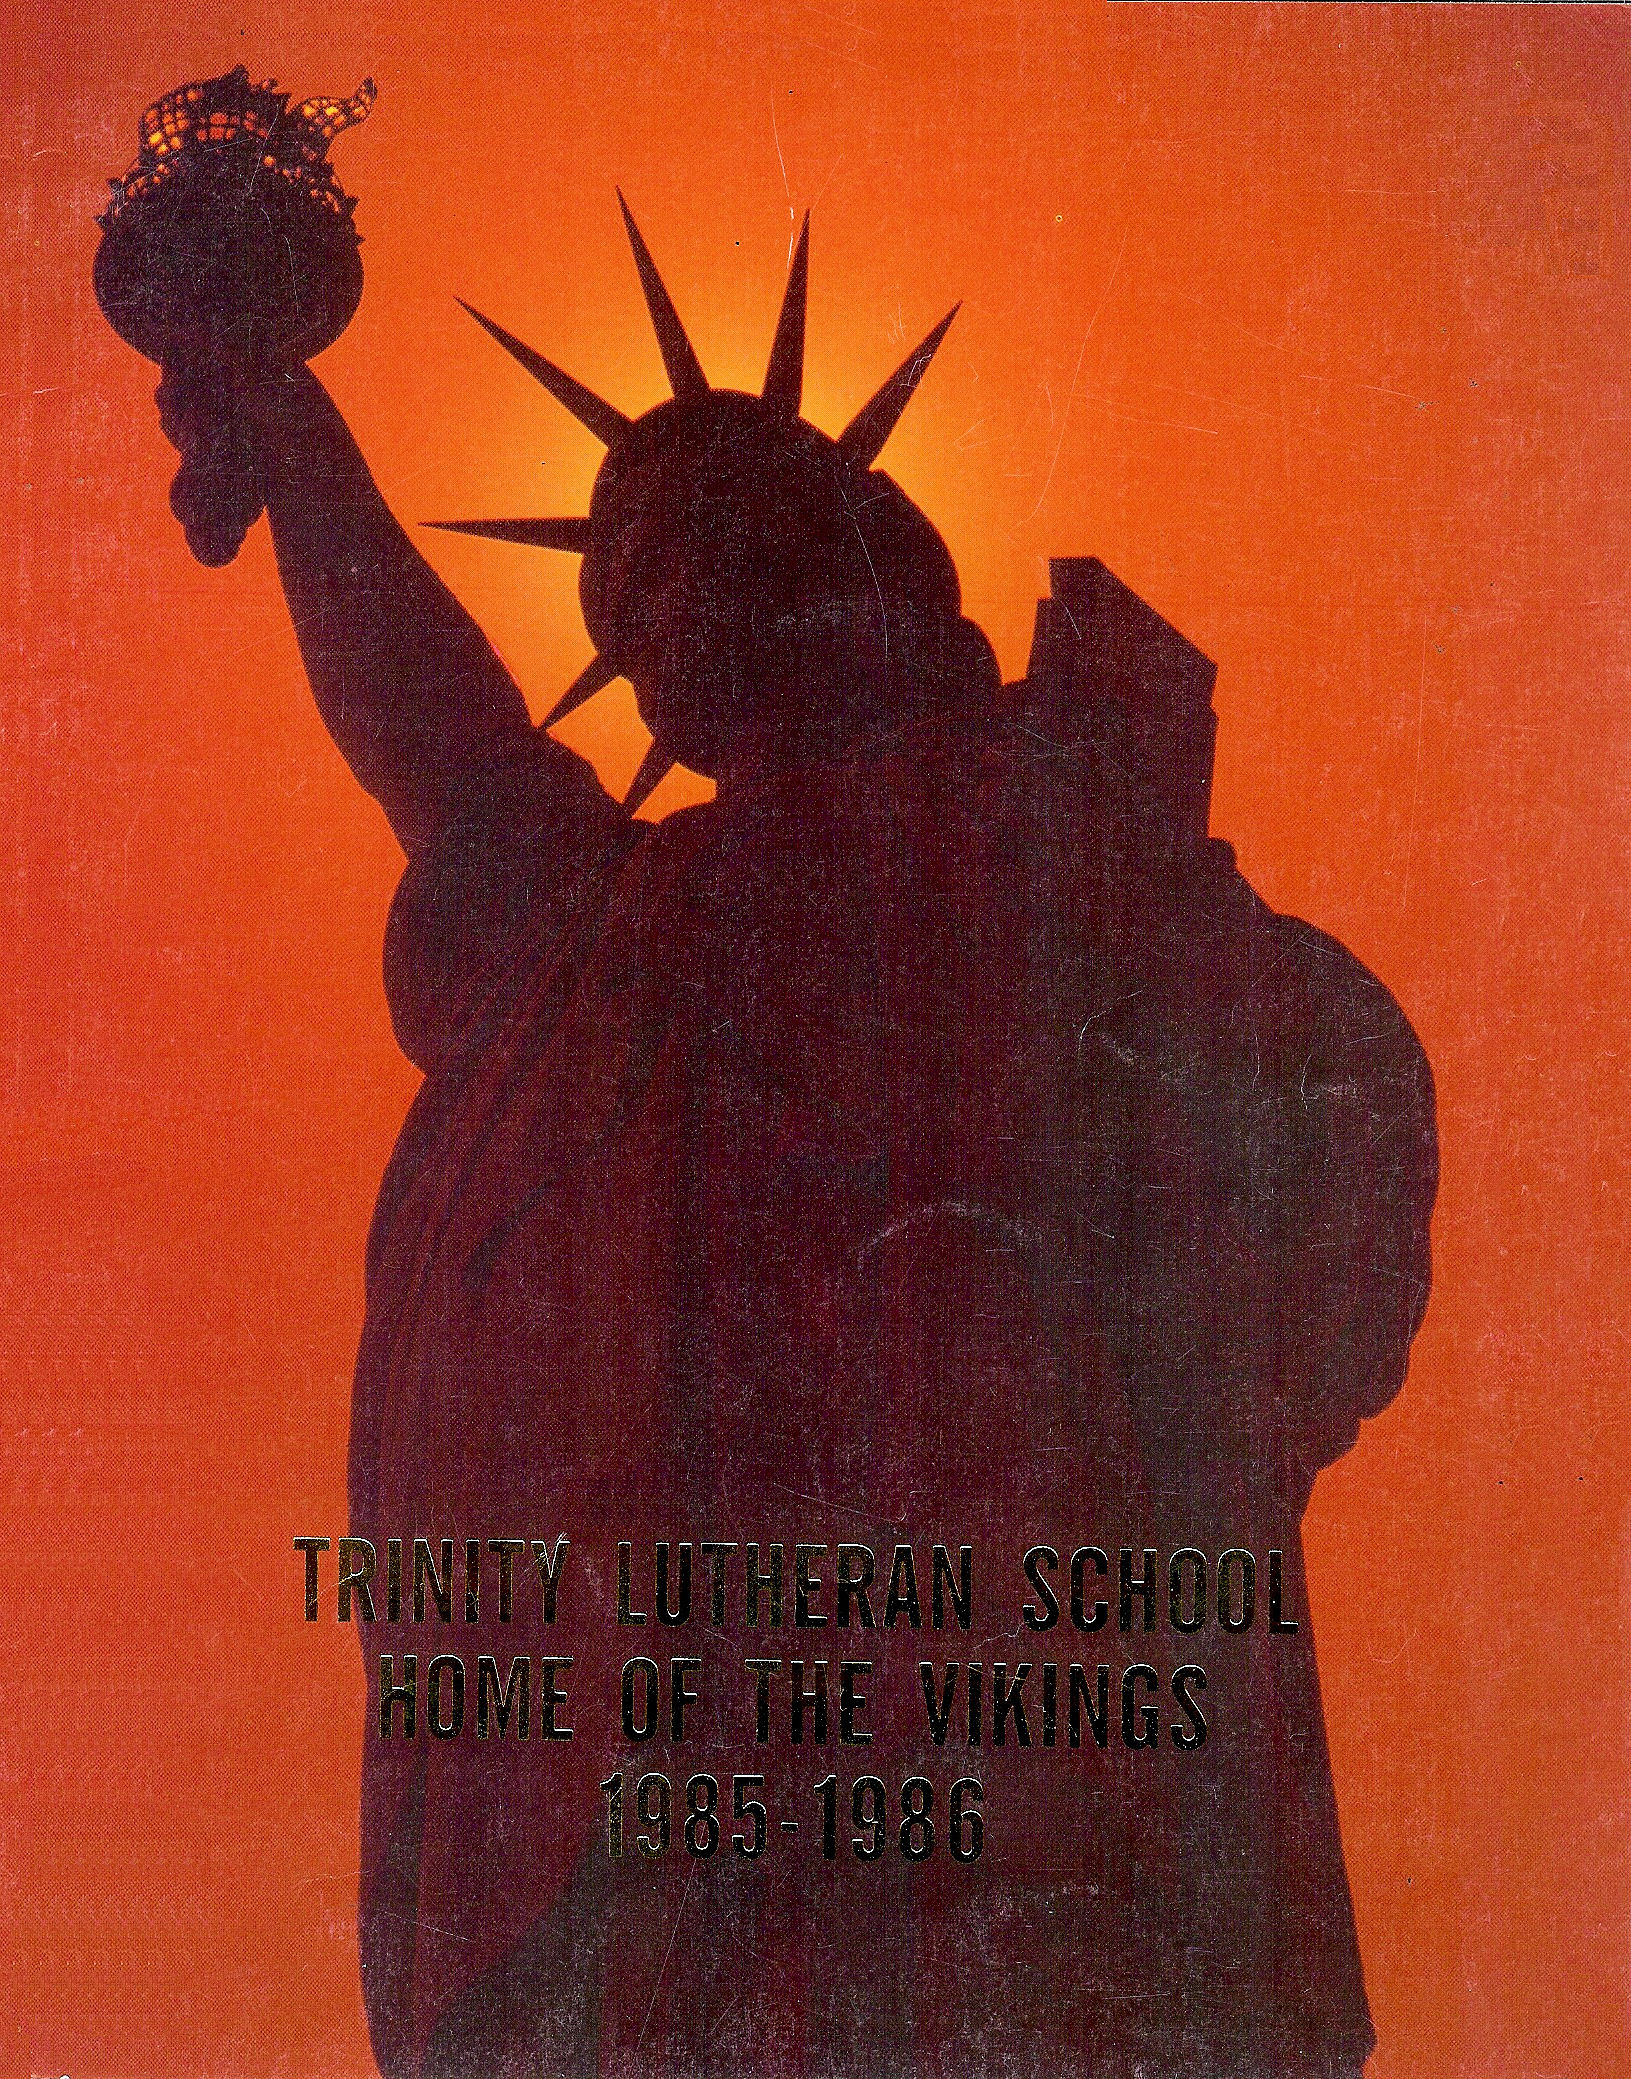 85-86 Yearbook Cover